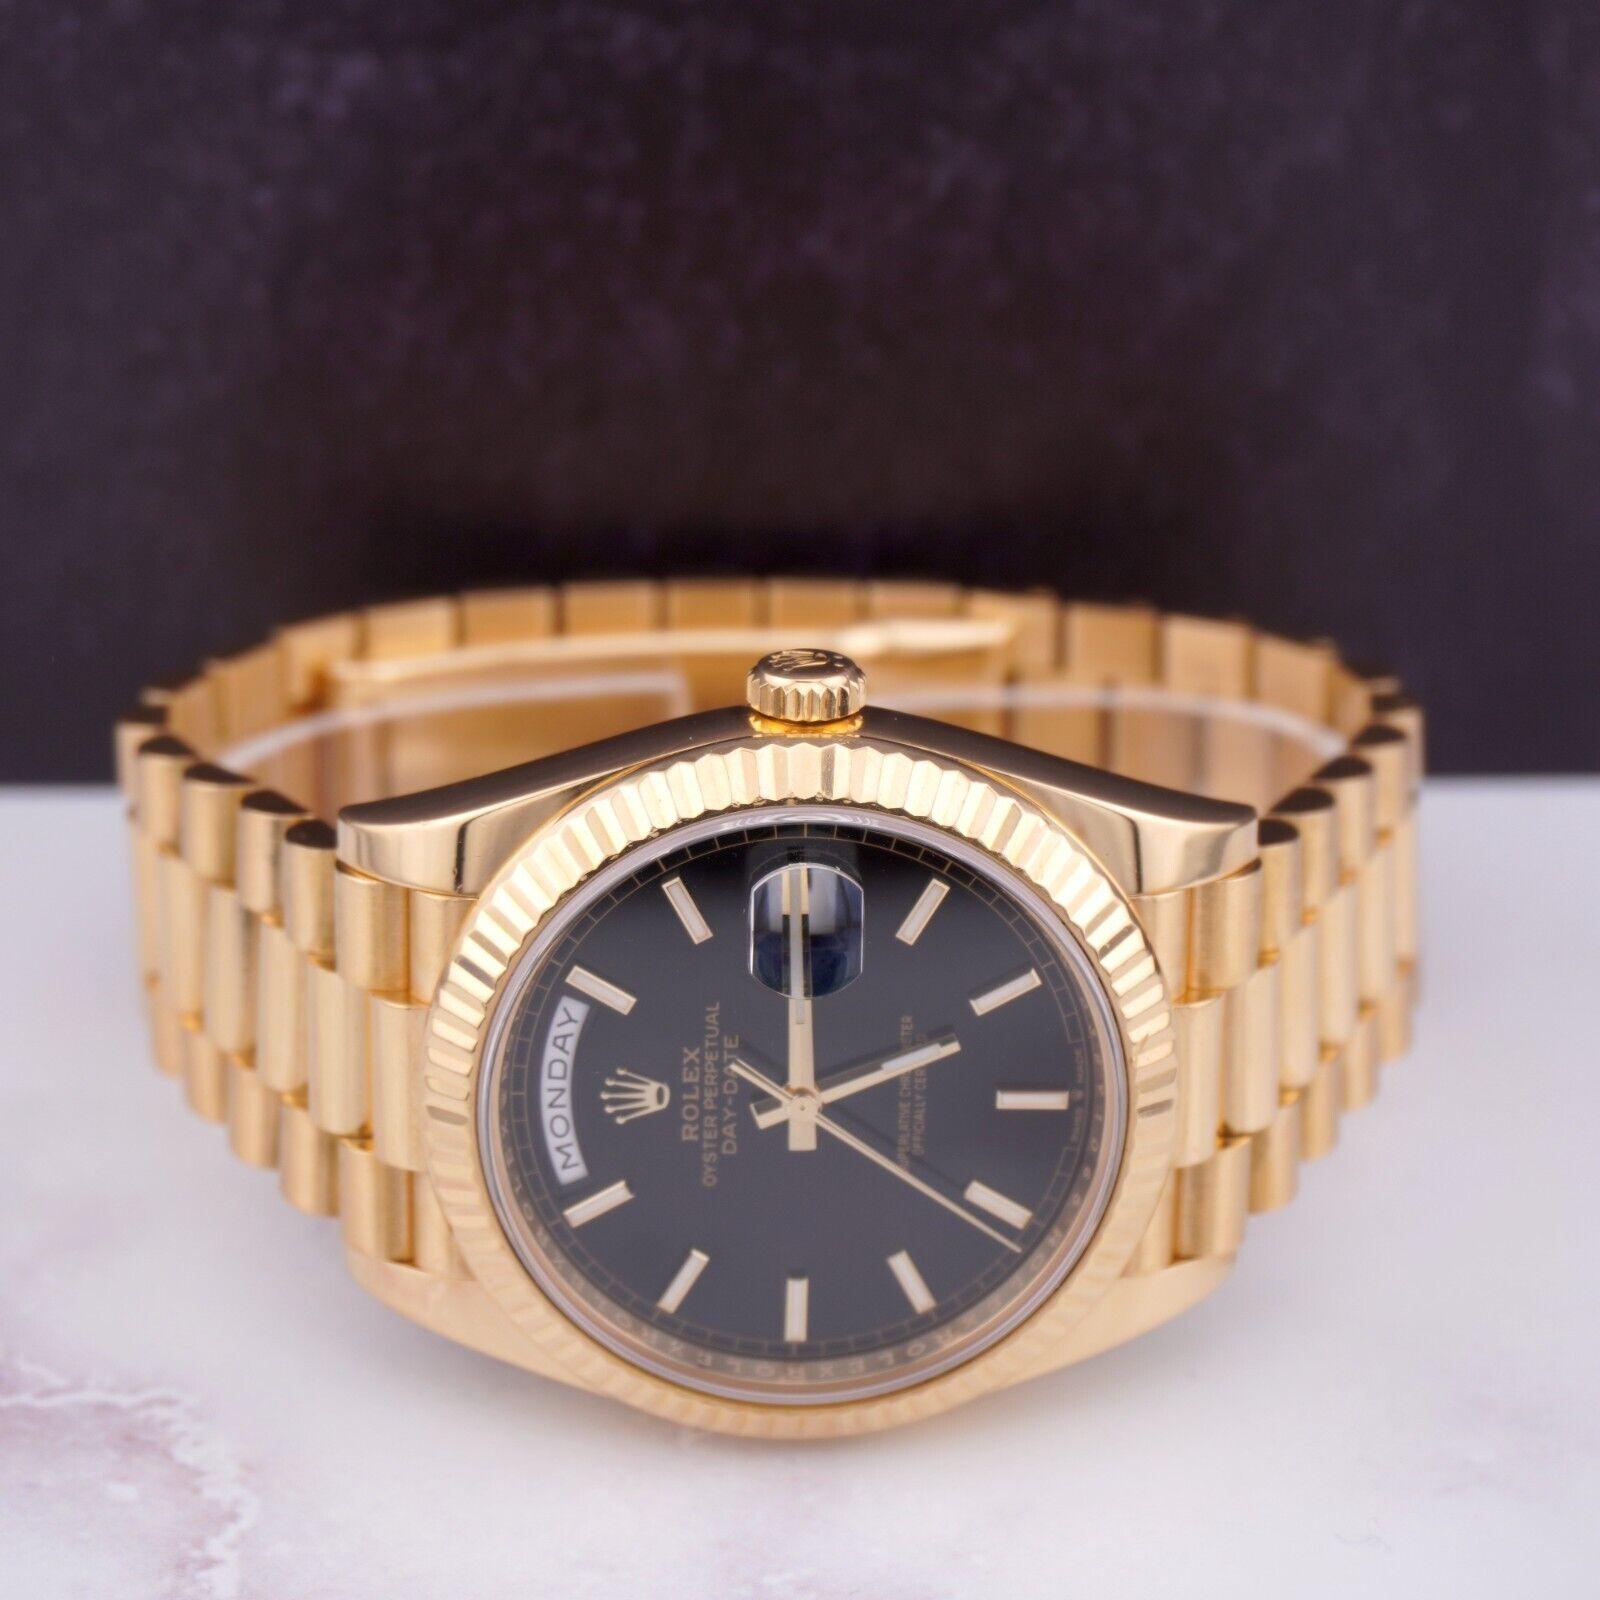 Rolex Day-Date 40 President 18k Yellow Gold Men's Watch Black Motif DIAL 228238 In Excellent Condition For Sale In Pleasanton, CA